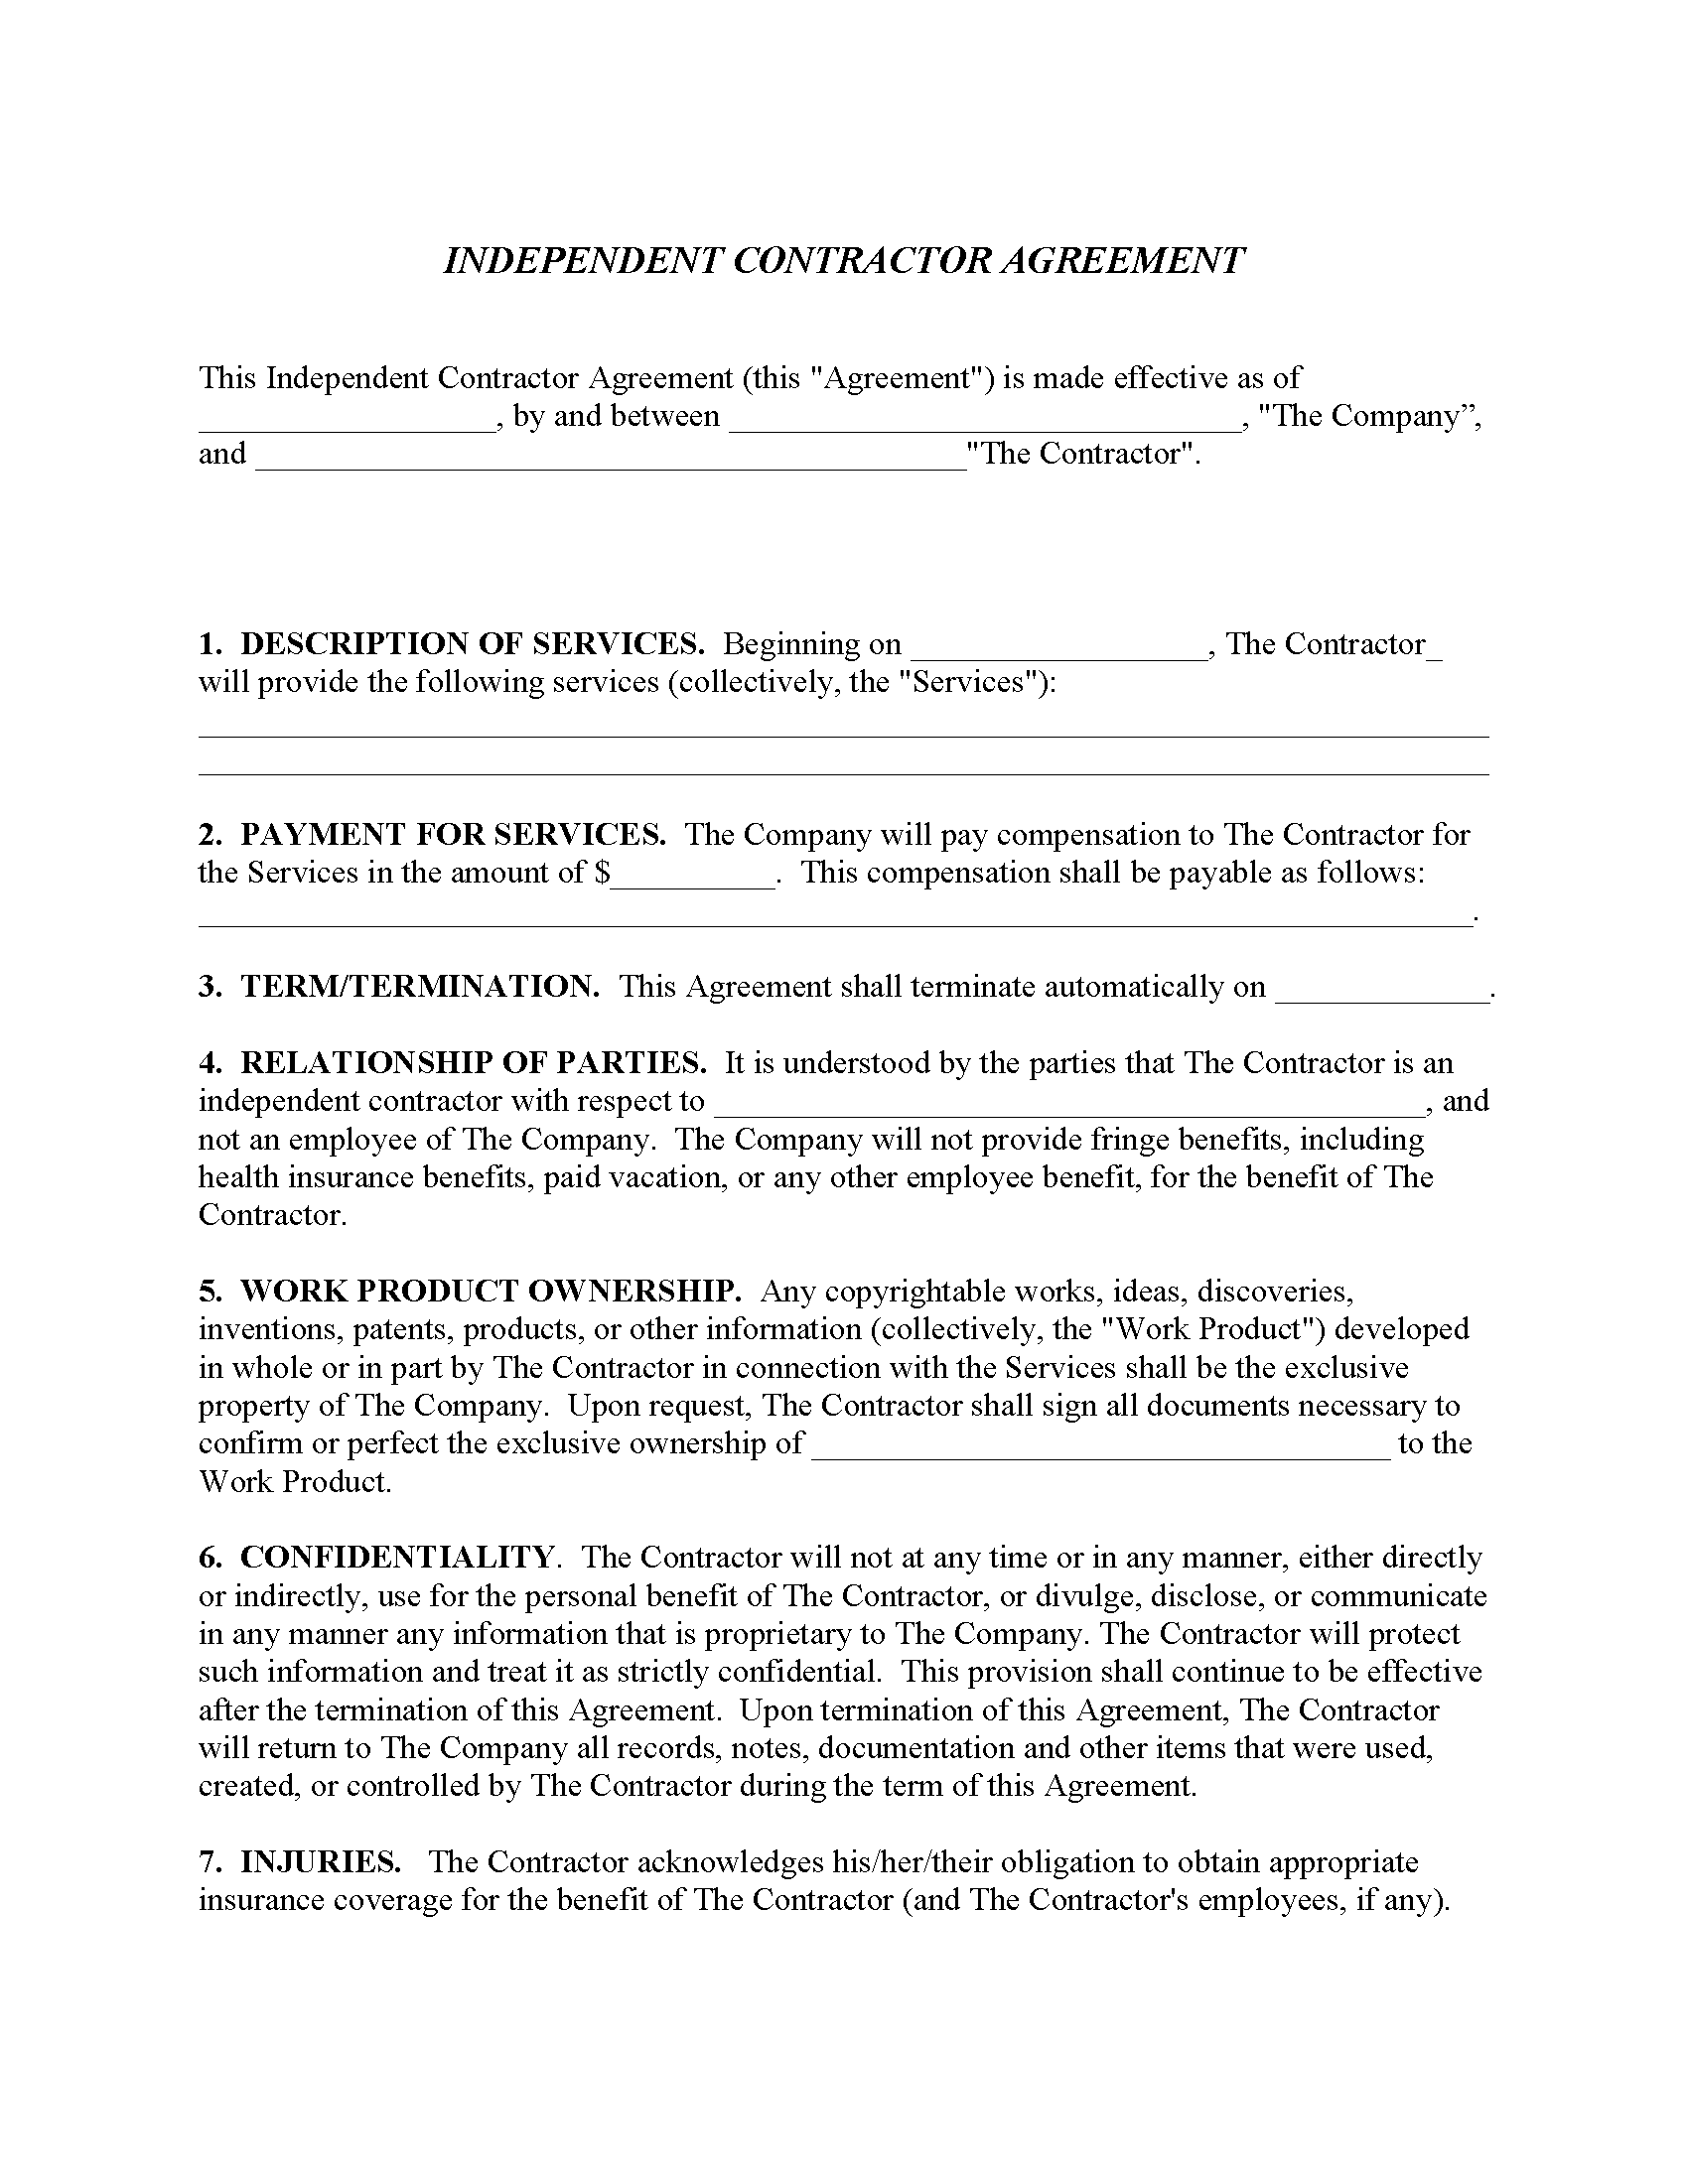 Independent Contractor Agreement - Fillable PDF - Free Printable Legal ...